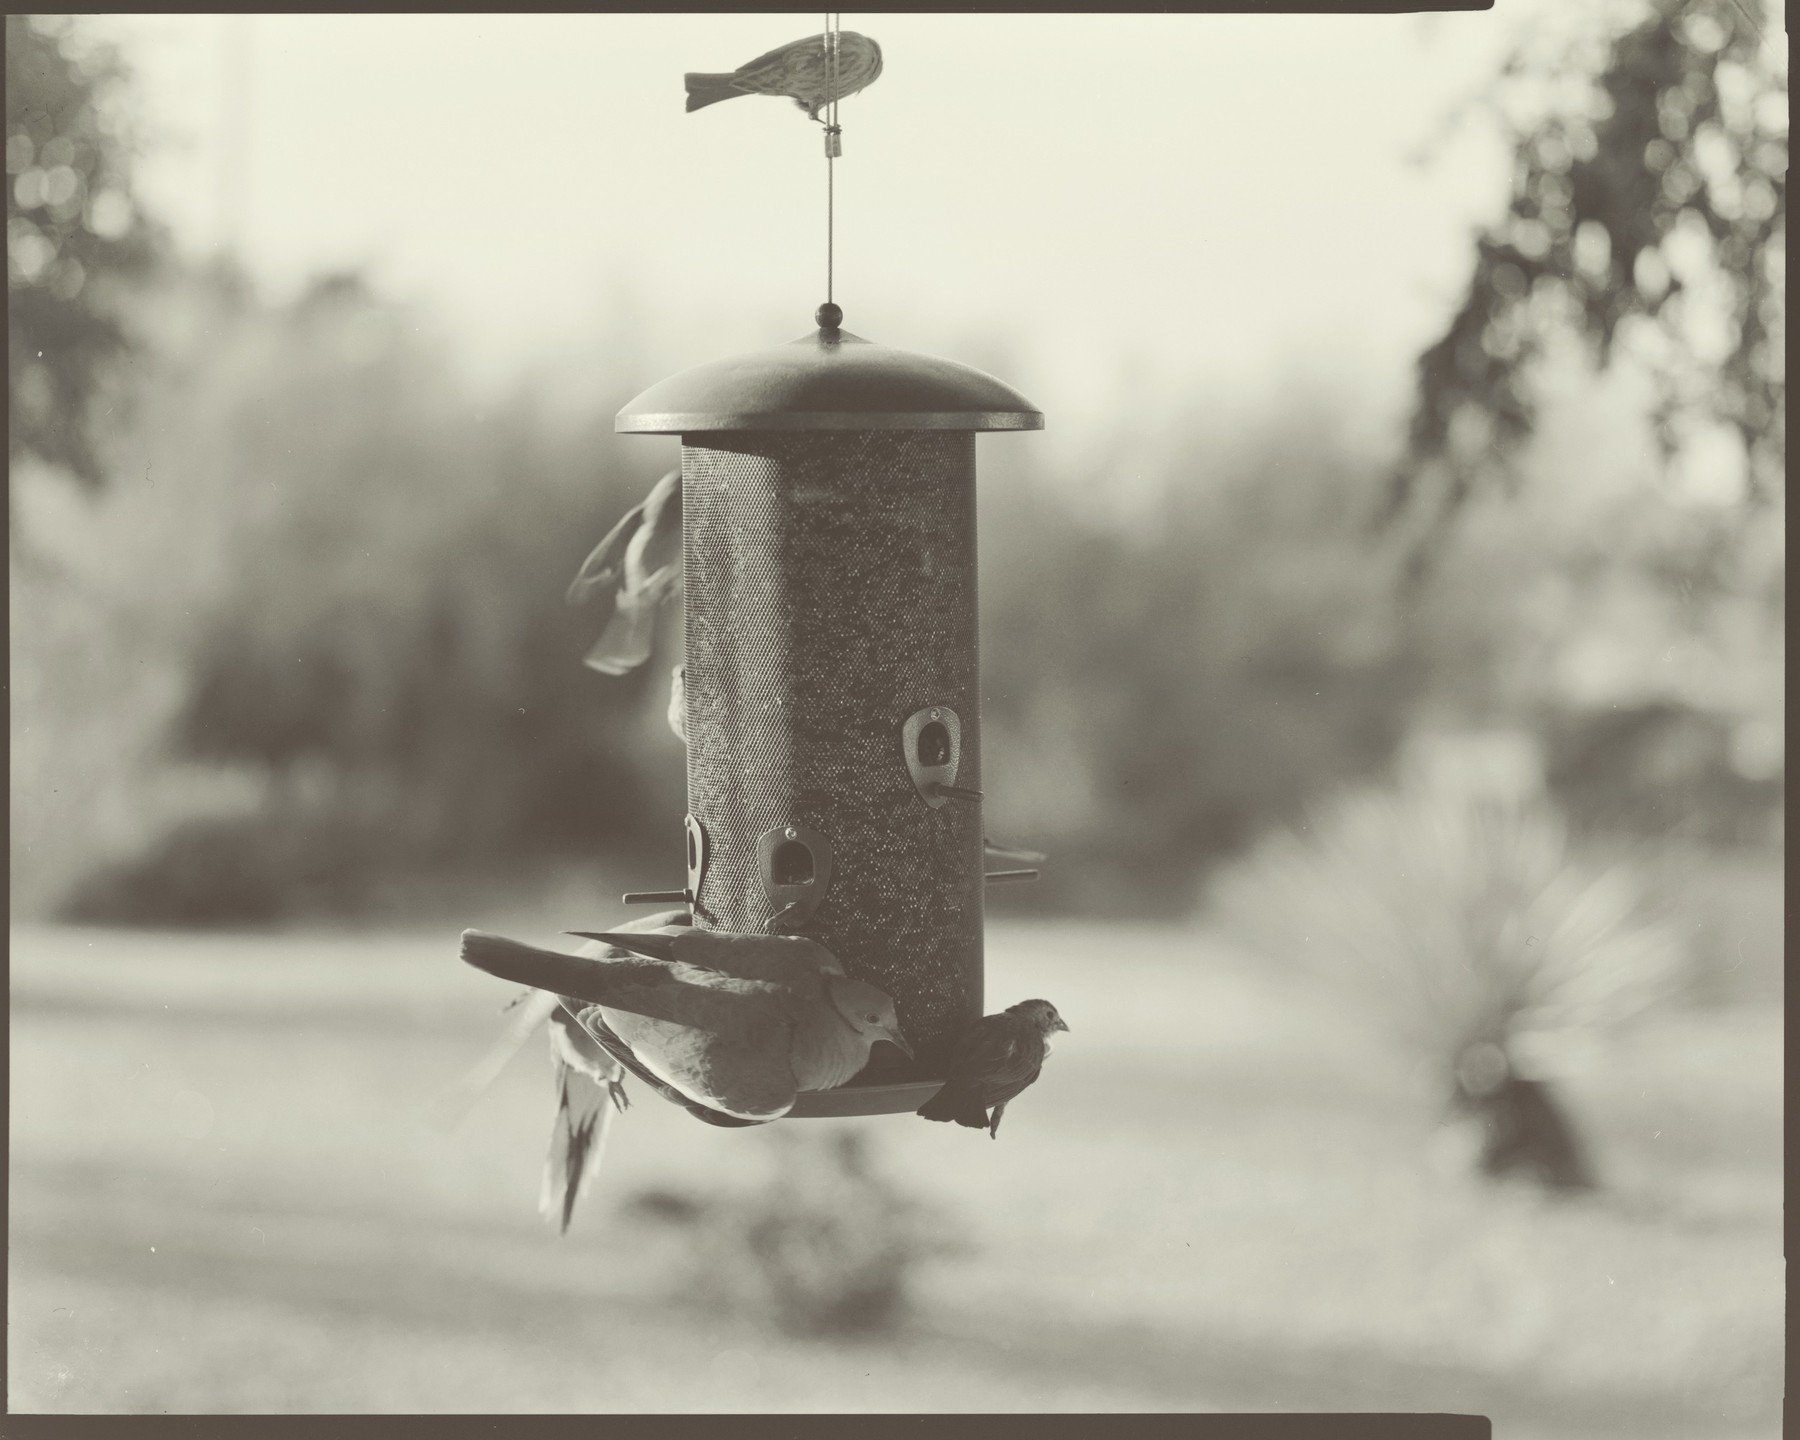 Photo from the Arizona Birdfeeder. I think the project is moving into the video realm instead of still photos. In any case, I wrote about it on my blog.